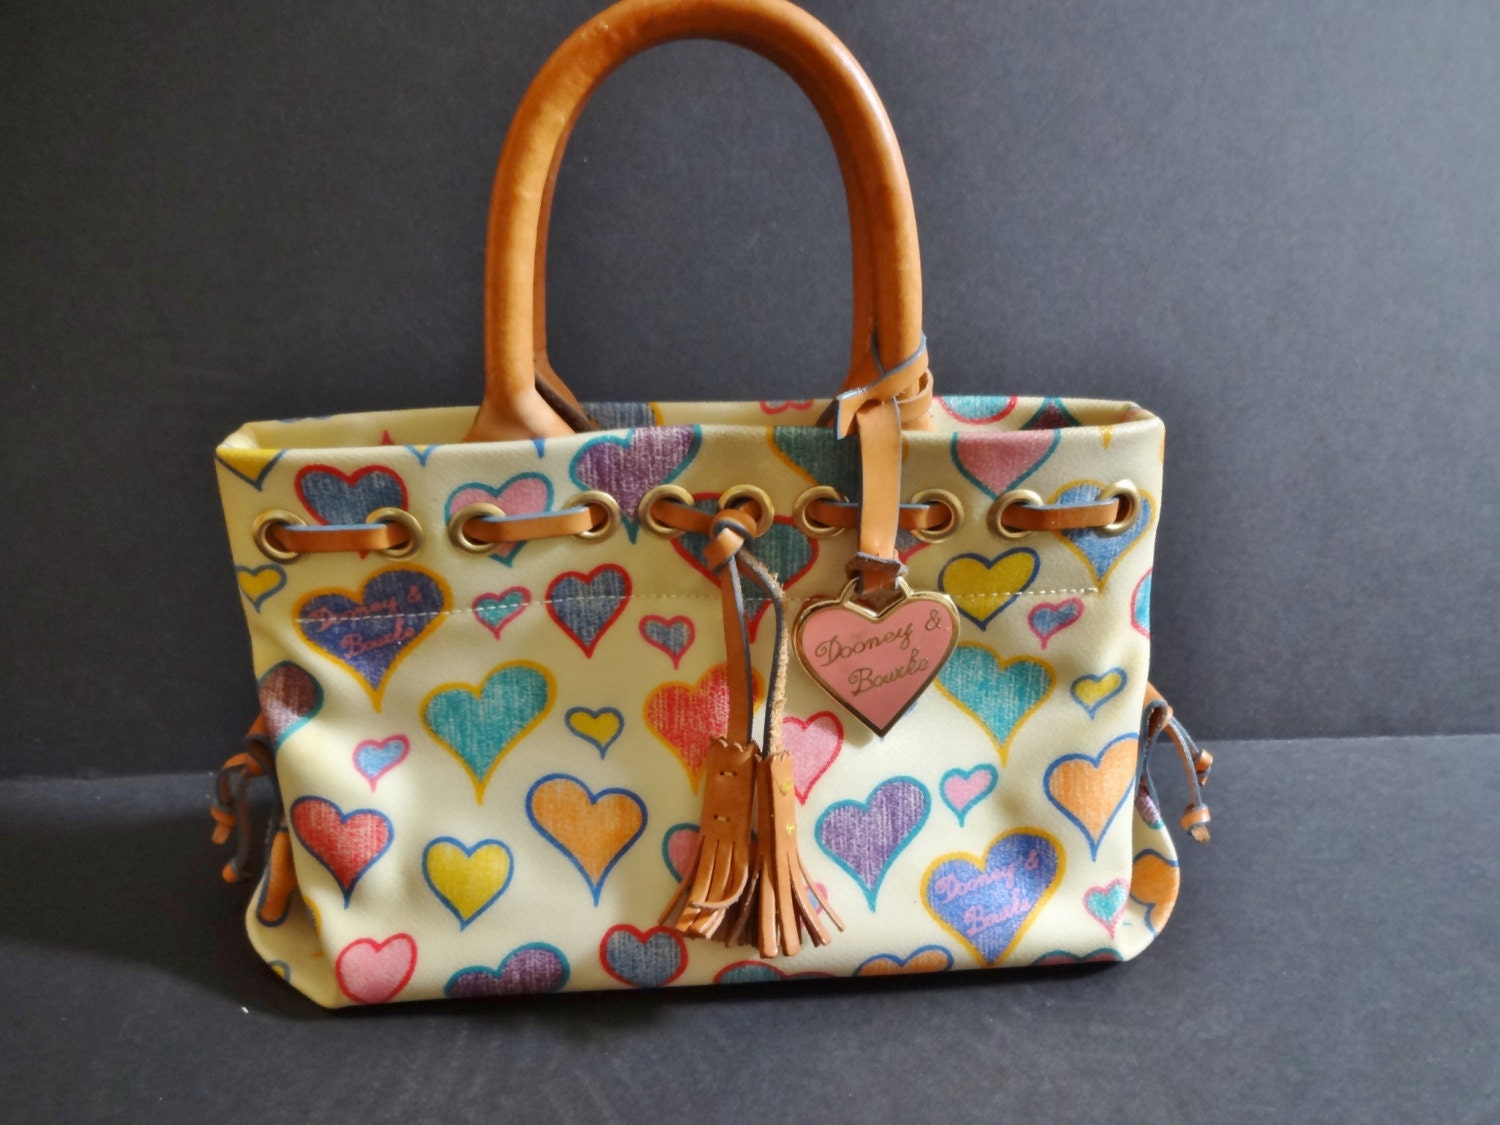 Dooney and Bourke Crayon Hearts White Tiny Tassel Tote Bag